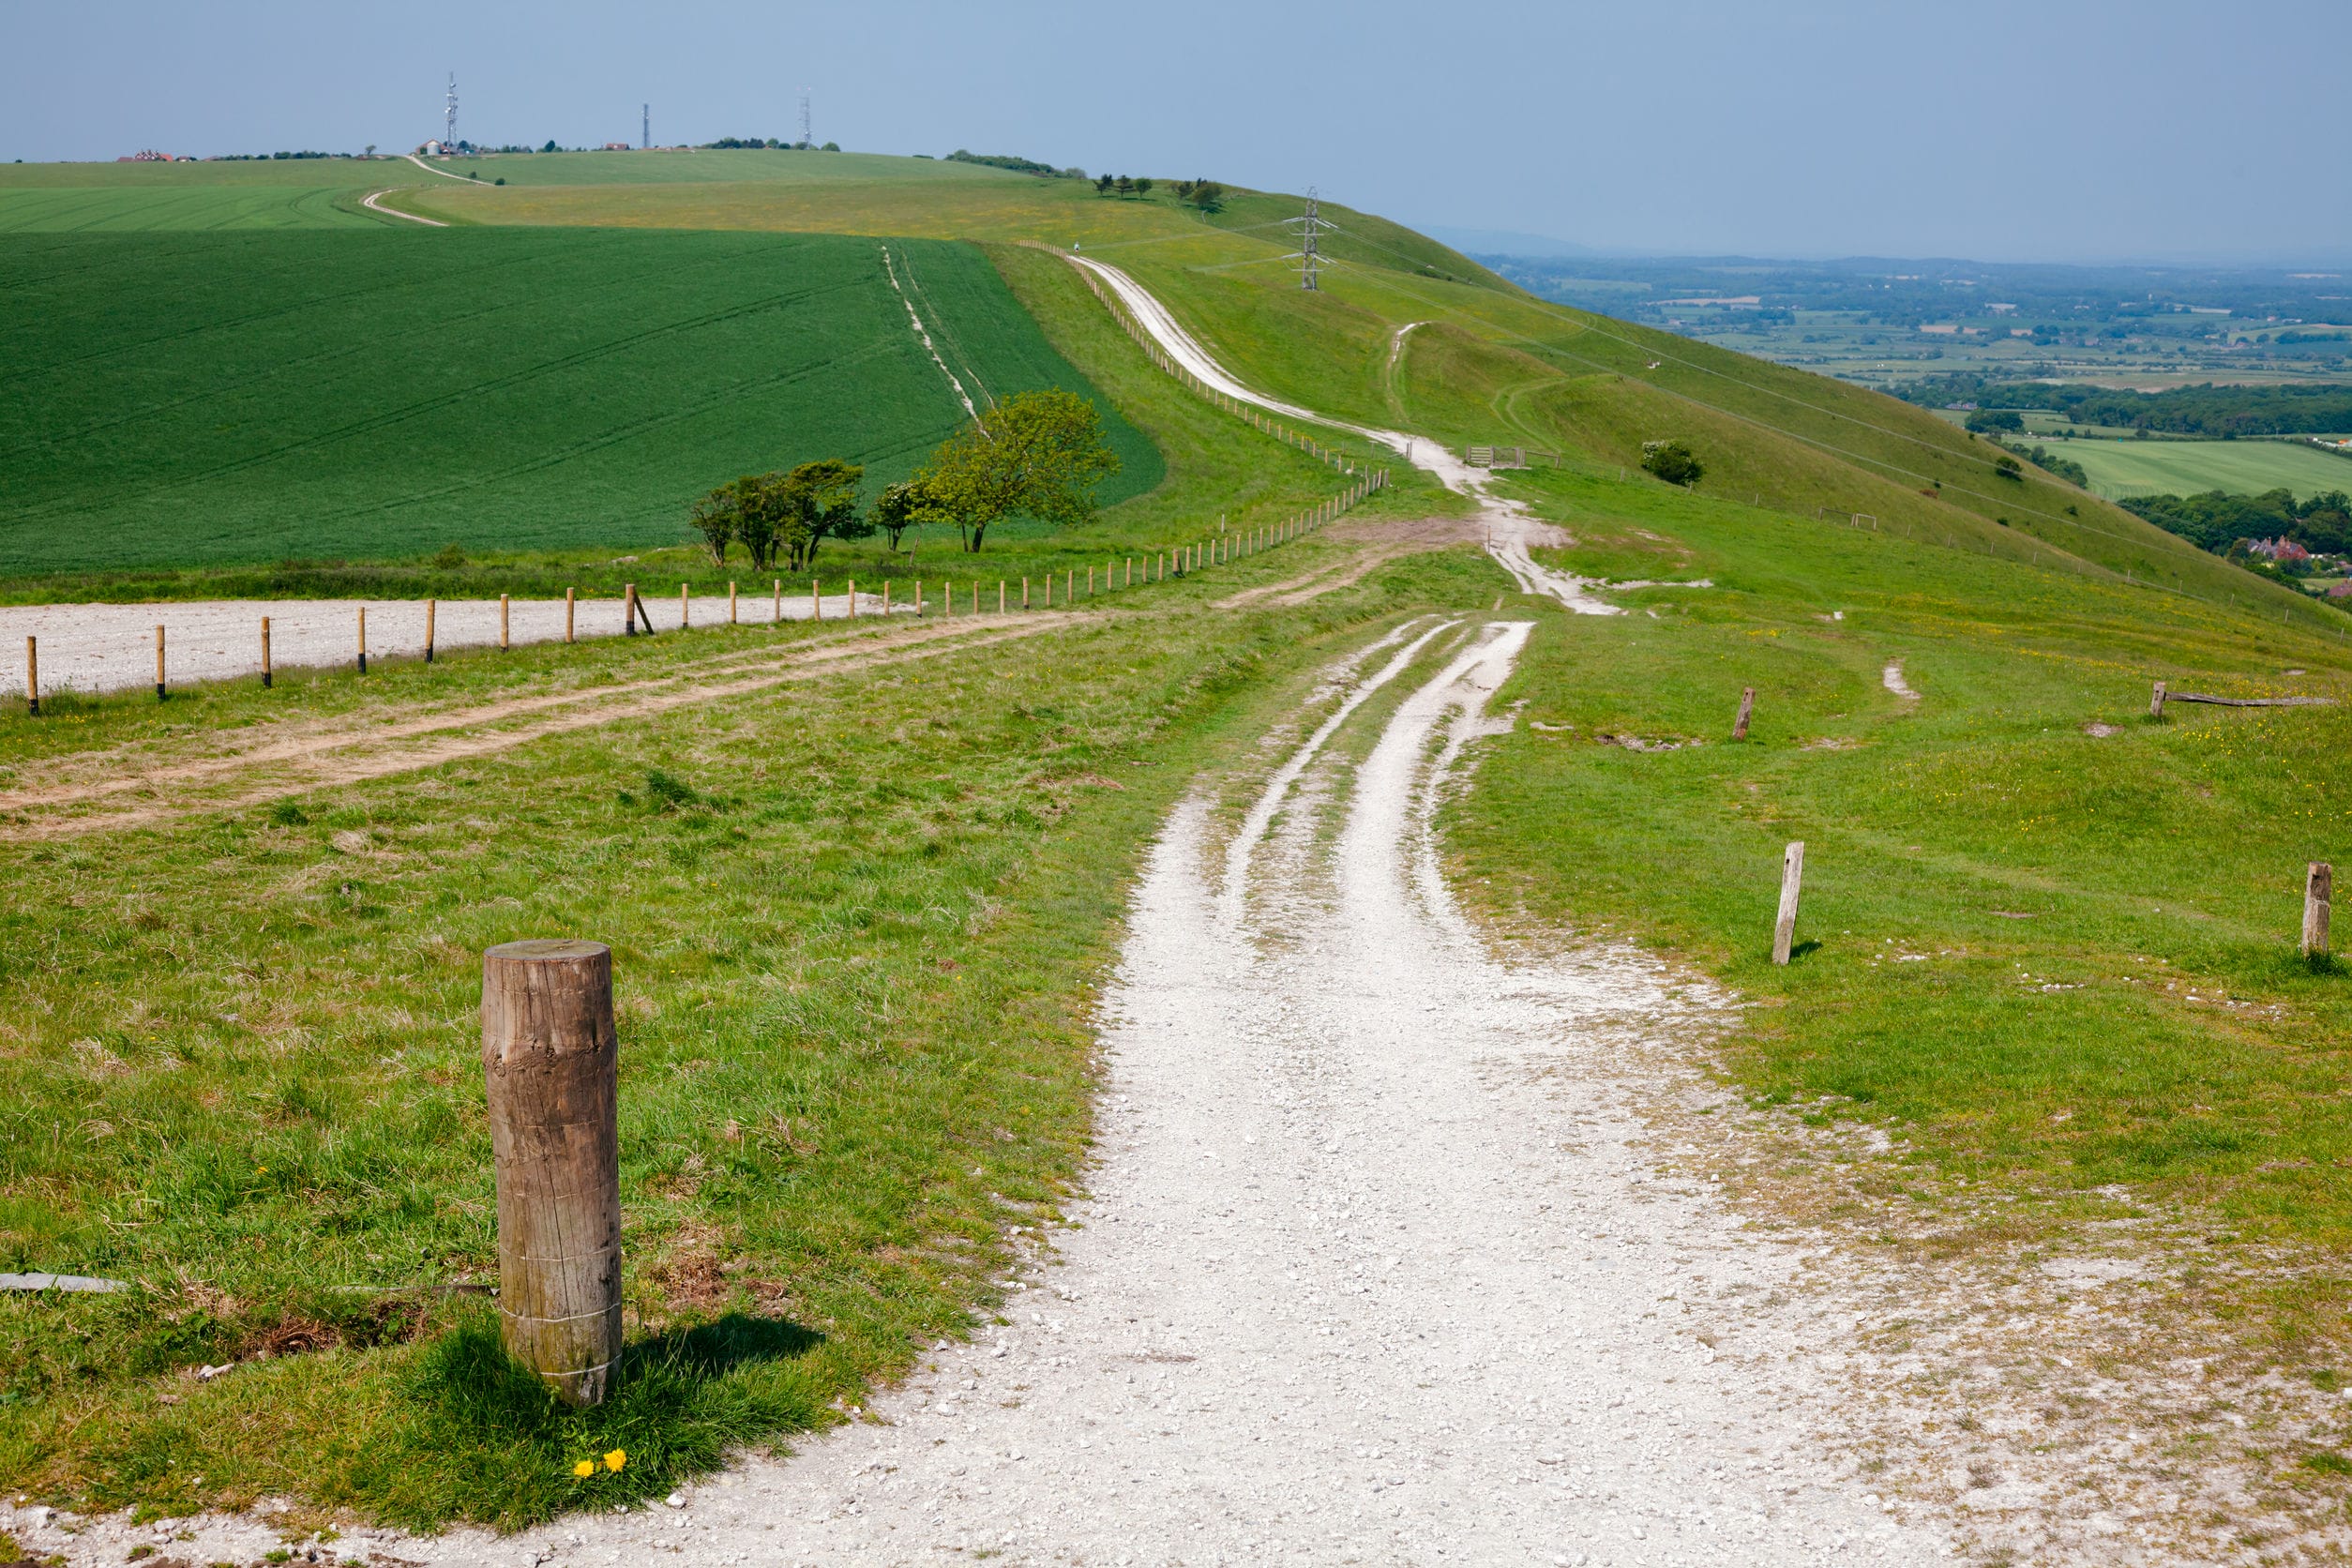 south downs way national trail in sussex southern england uk